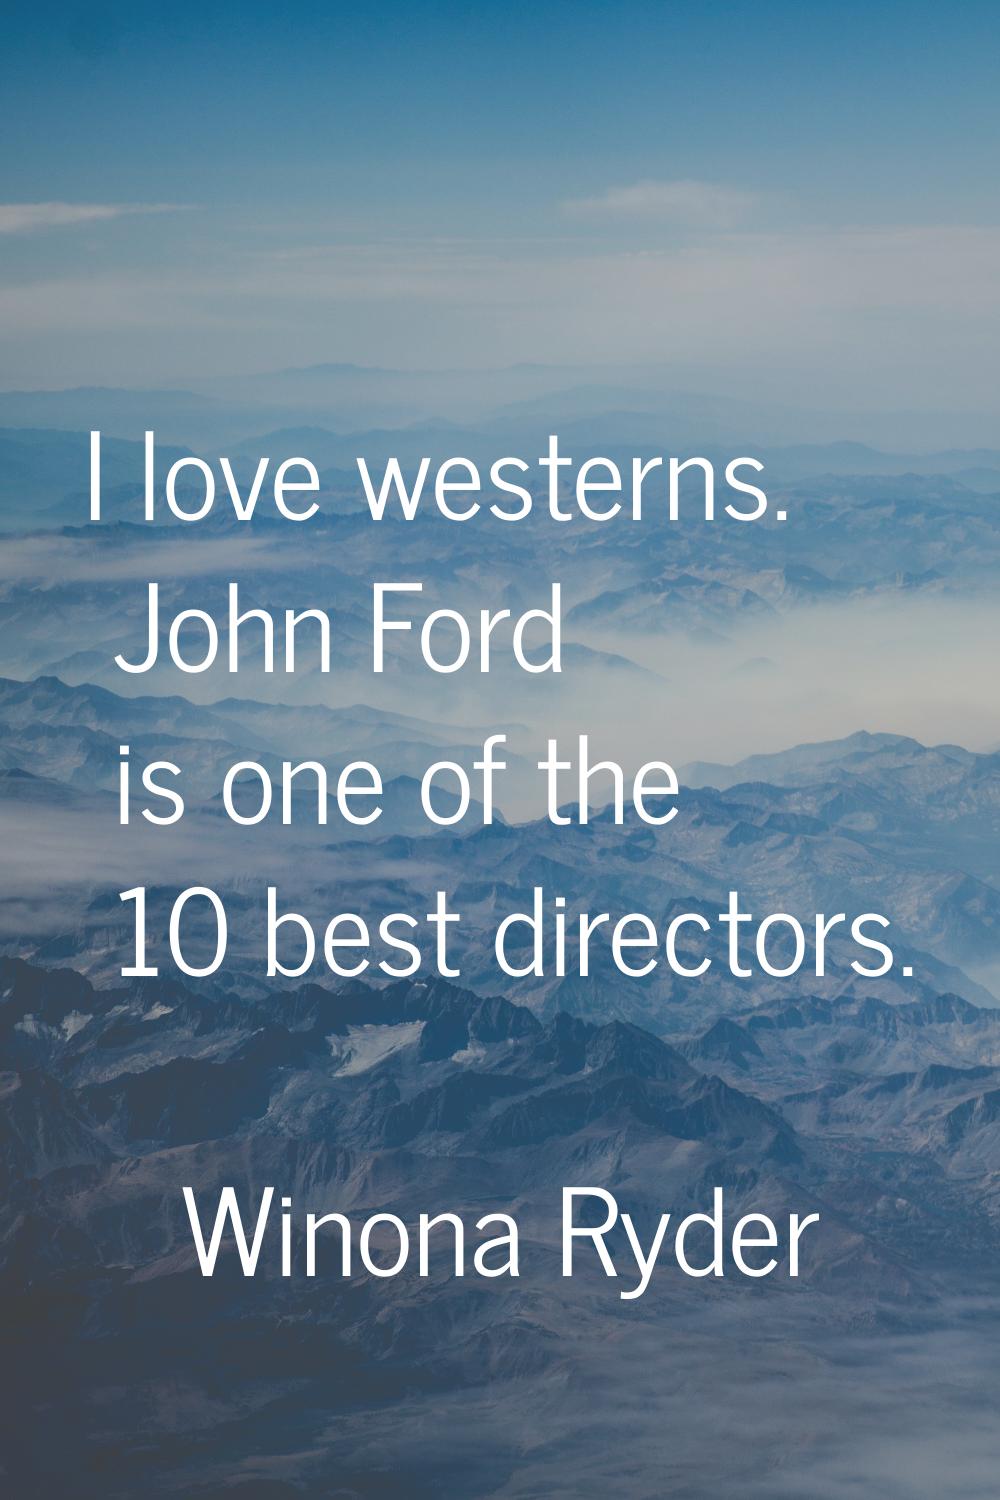 I love westerns. John Ford is one of the 10 best directors.